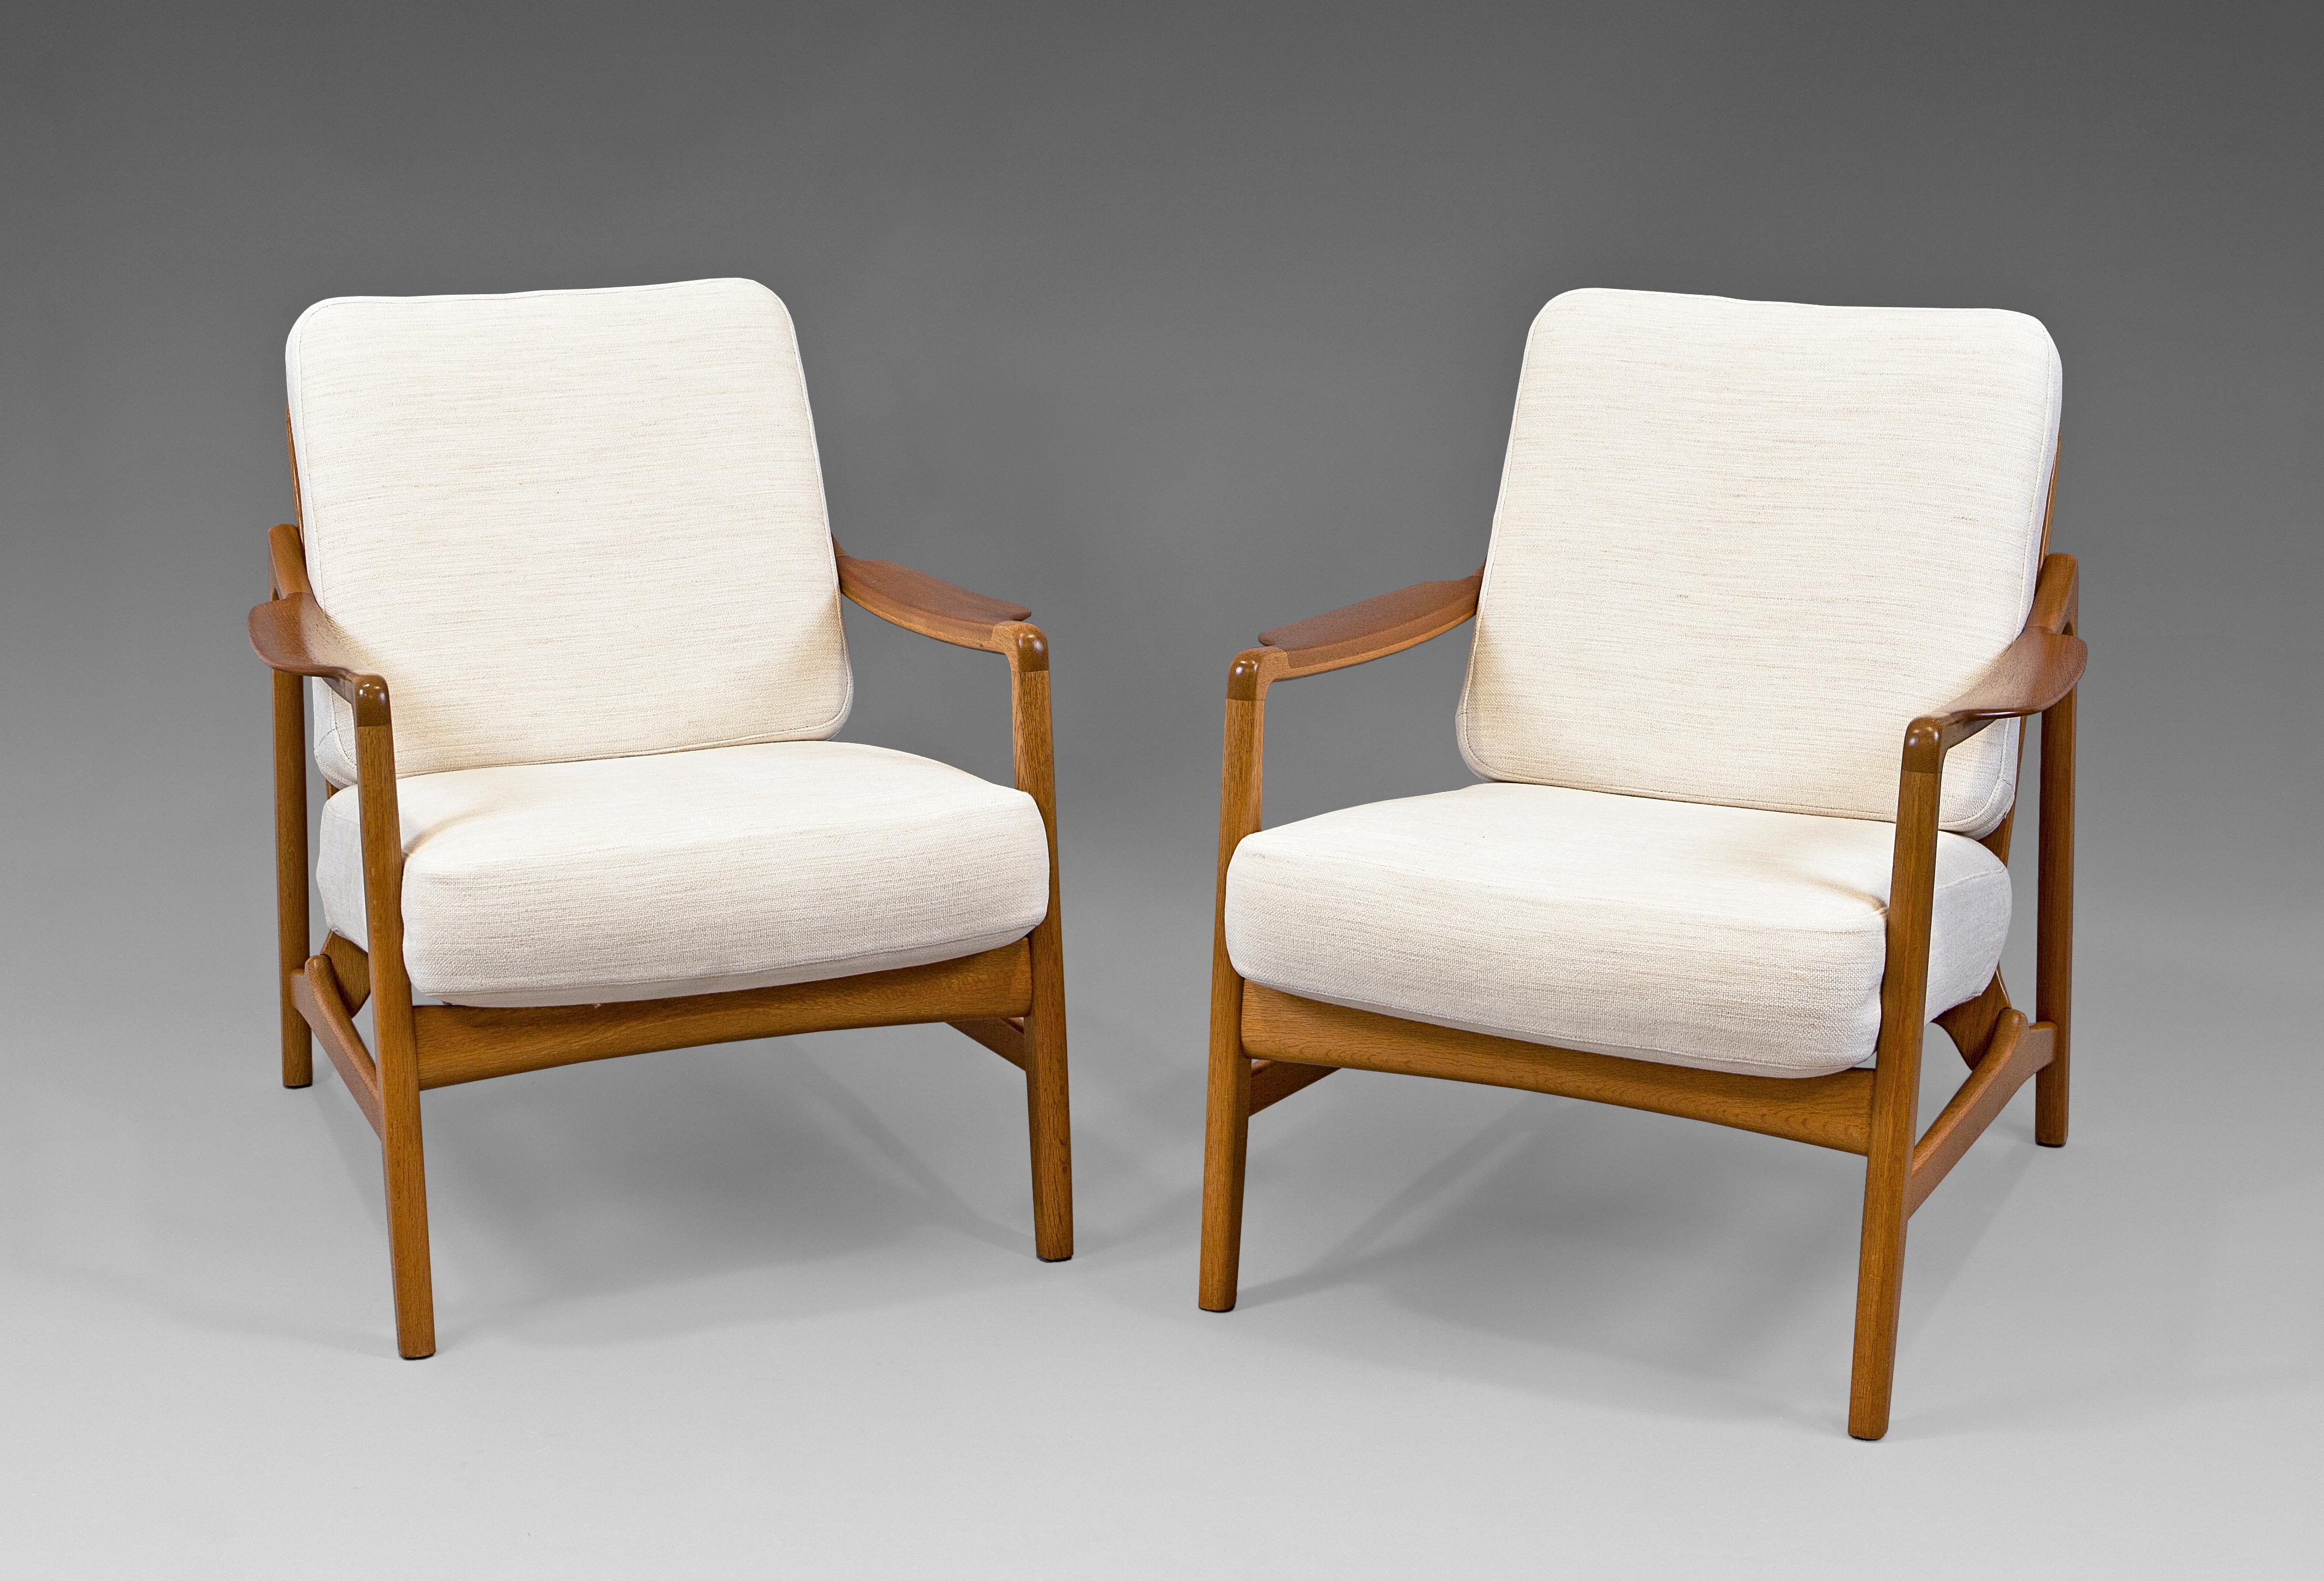 Pair of model “117” armchairs by Tove and Edvard Kindt-Larsen for France and Daverkosen. Denmark, 1950s. Oak frame with teak armrests, loose cushions reupholstered. Magnificent condition, fully restored wood.